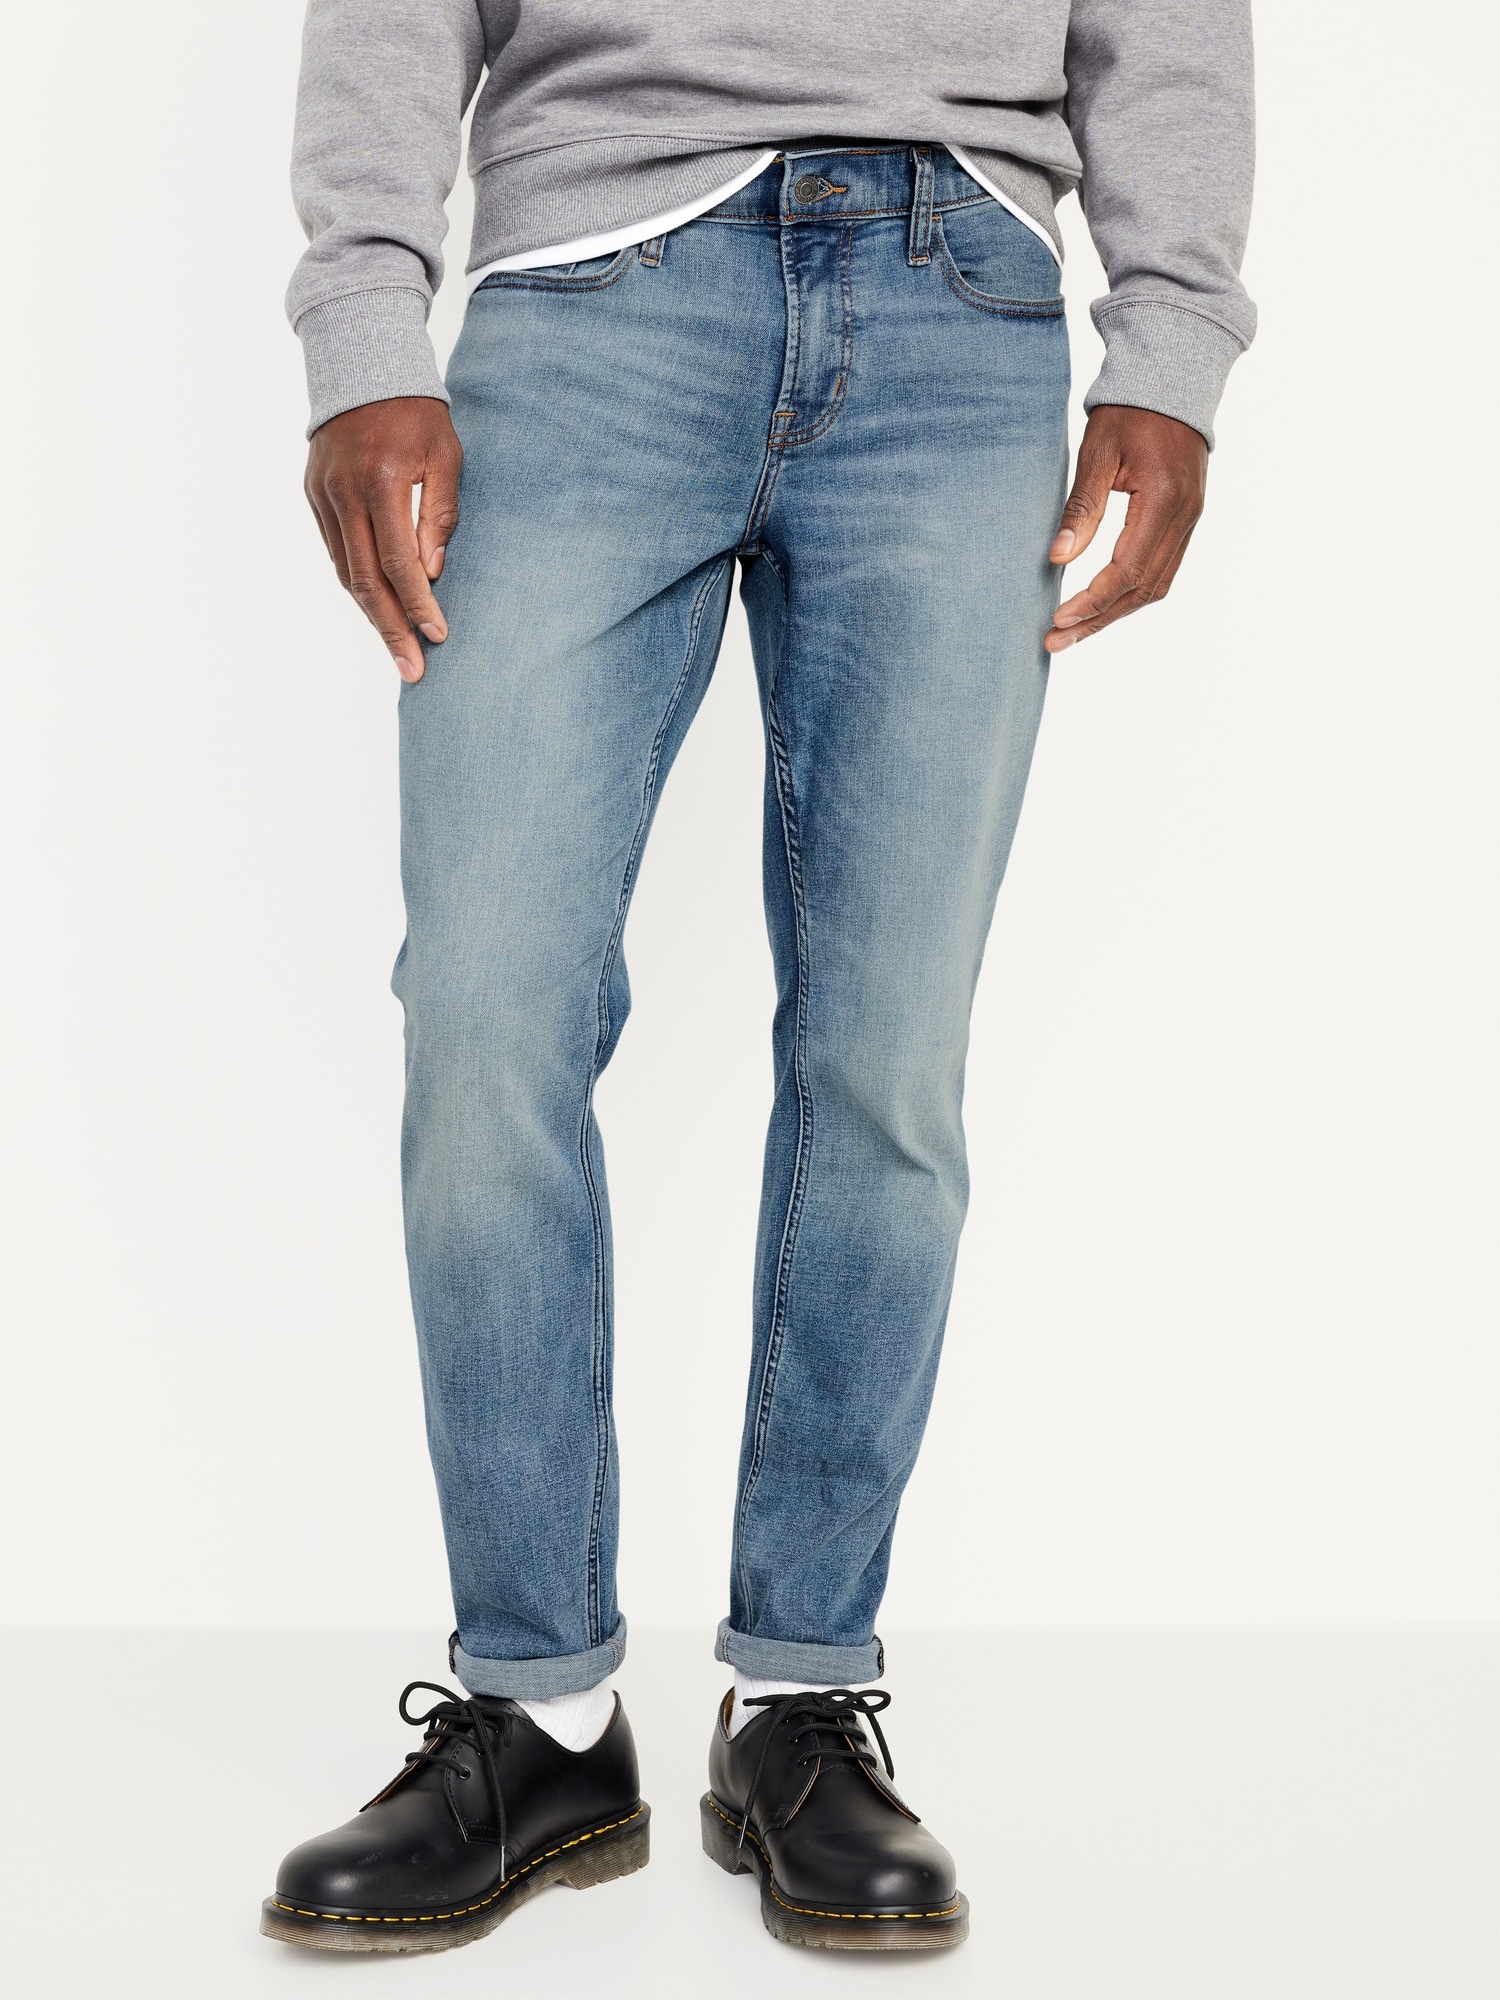 Athletic Taper 360° Tech Stretch Performance Jeans | Old Navy